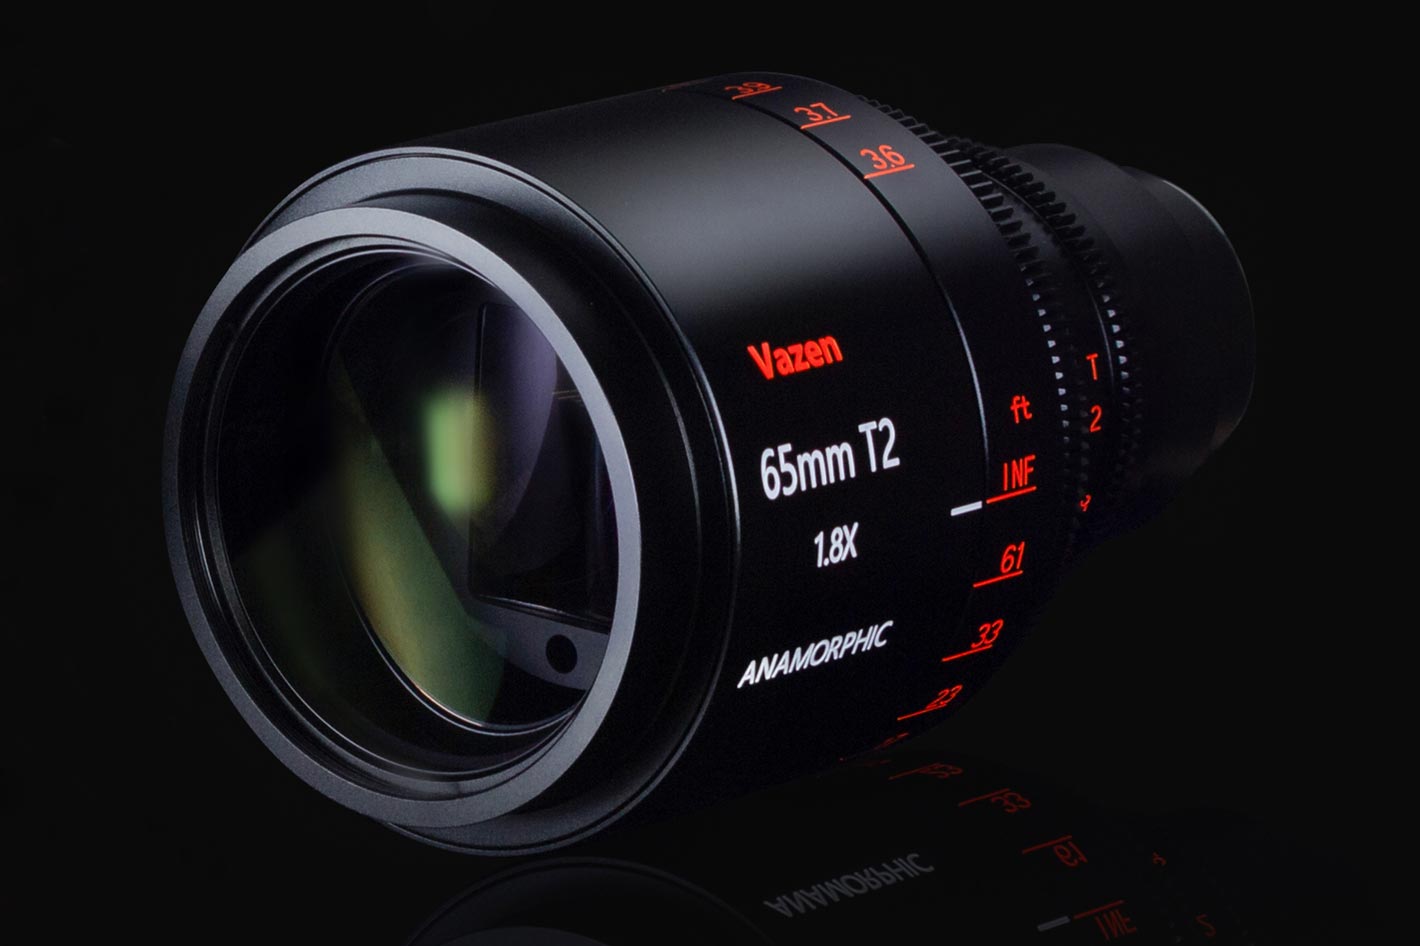 Vazen 65mm T2 1.8x Anamorphic lens for Micro Four Thirds